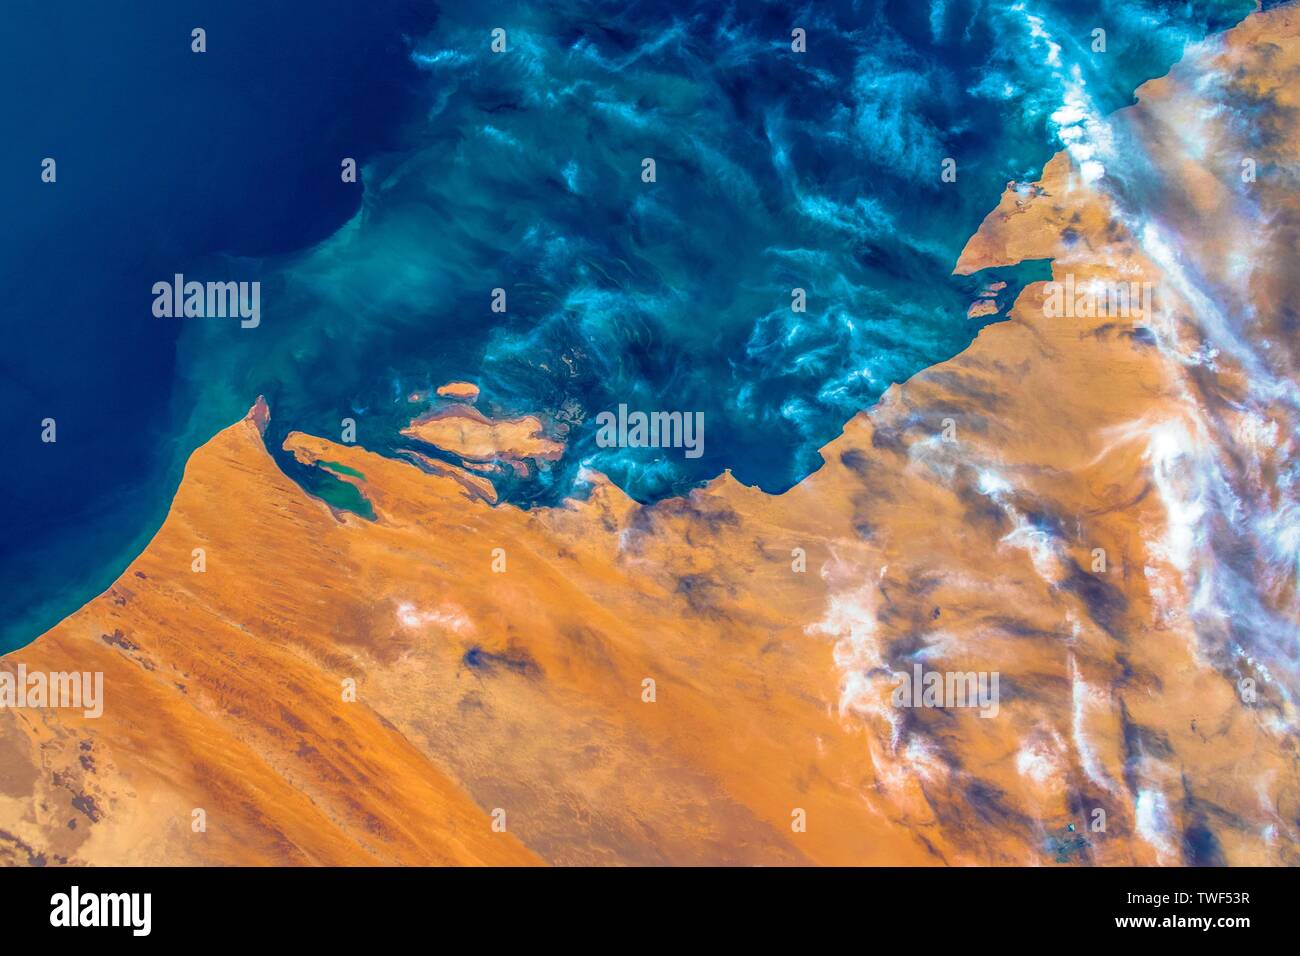 The coast of Mauritania. The beauty in nature of our planet Earth seen from the International Space Station (ISS). The image is a public domain handou Stock Photo